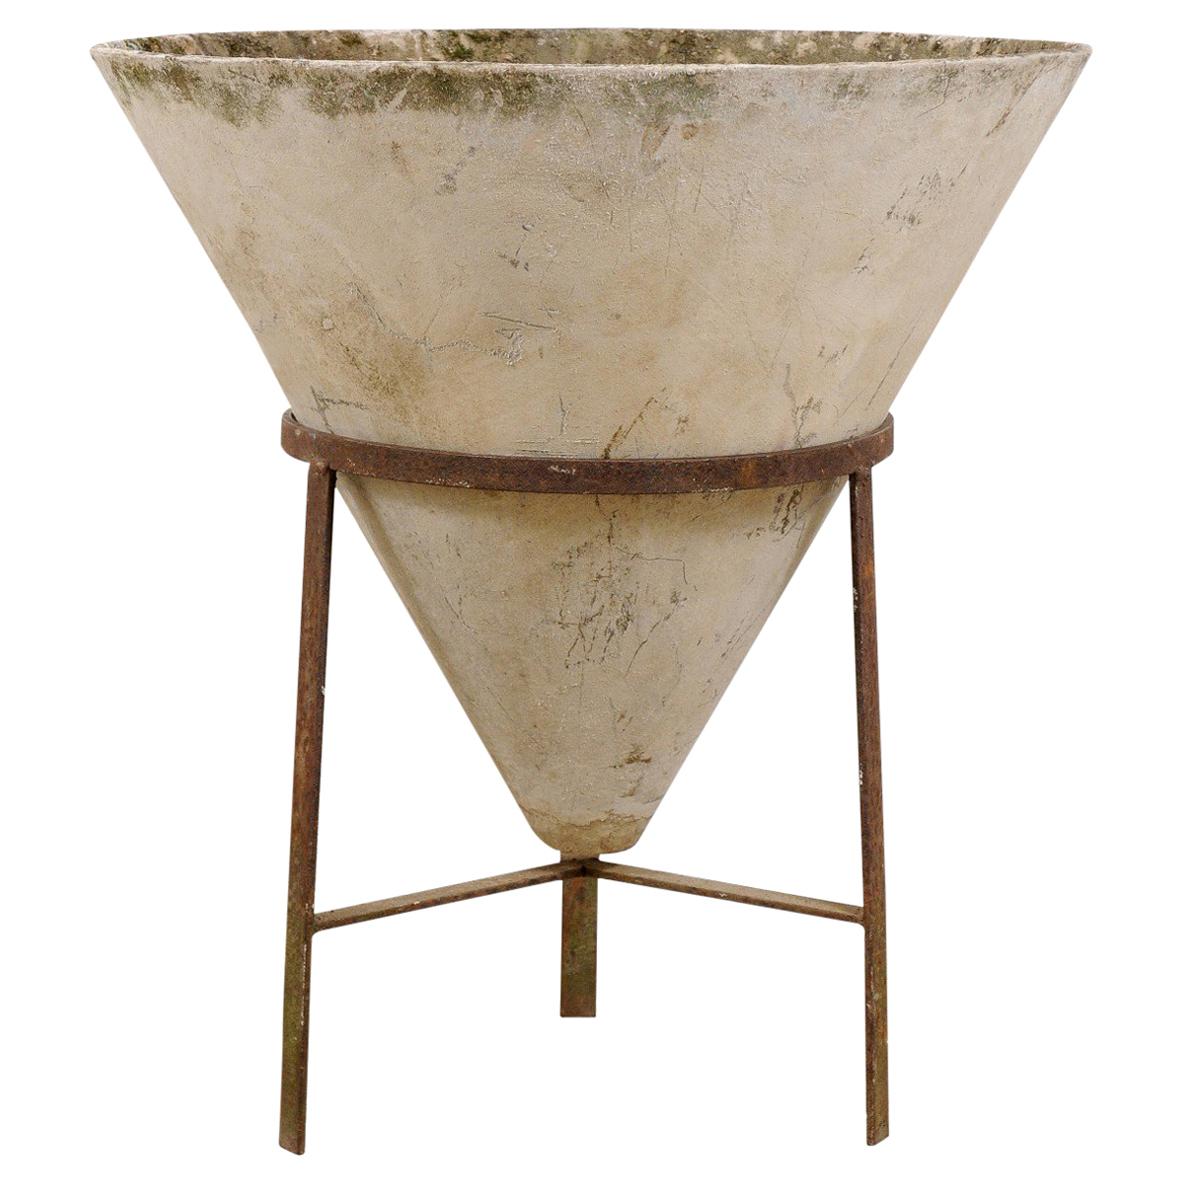 Midcentury Swiss Willy Guhl Cone Concrete Planter with Iron Stand